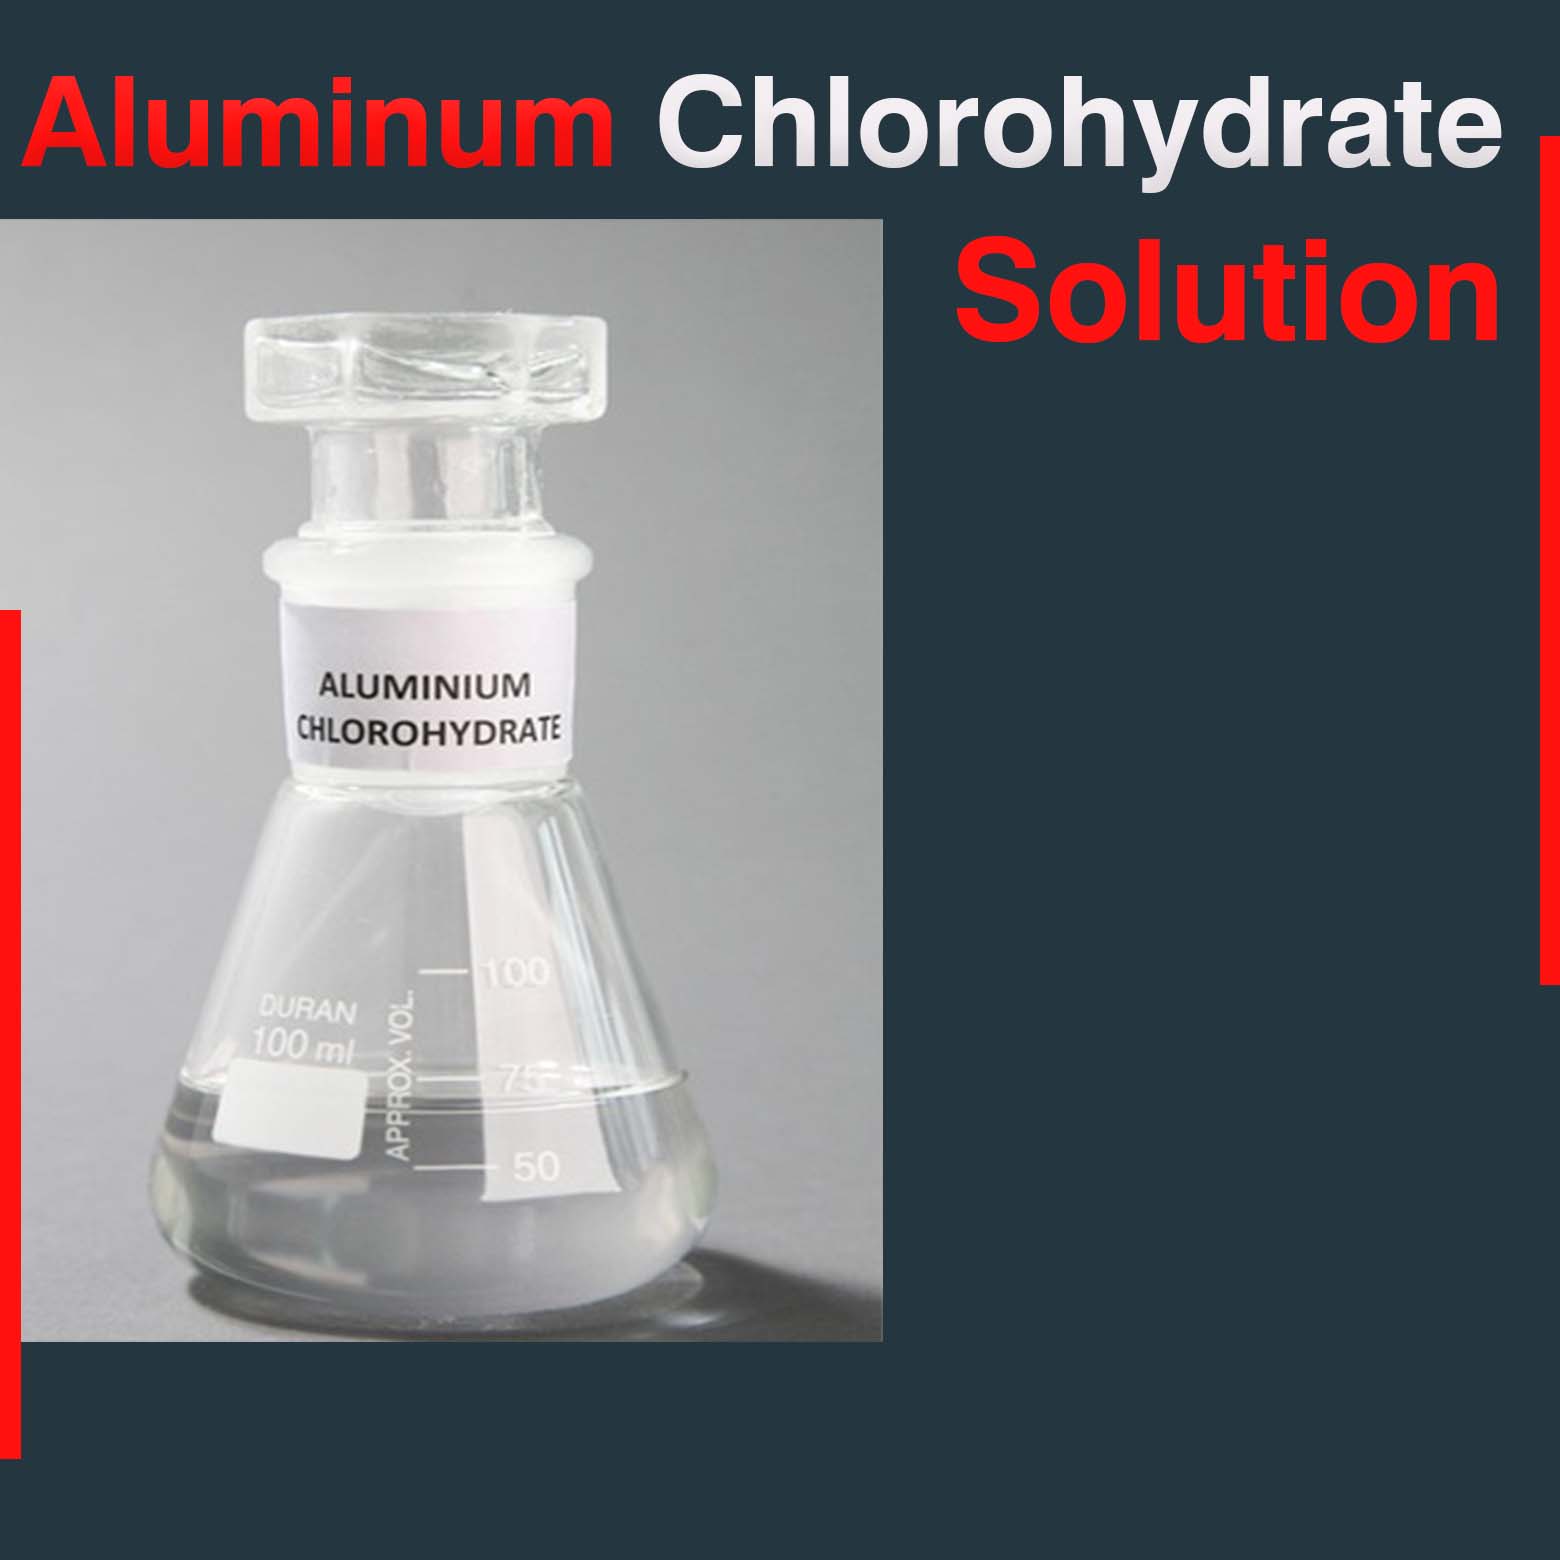 Aluminum Chlorohydrate Solution In Malaysia